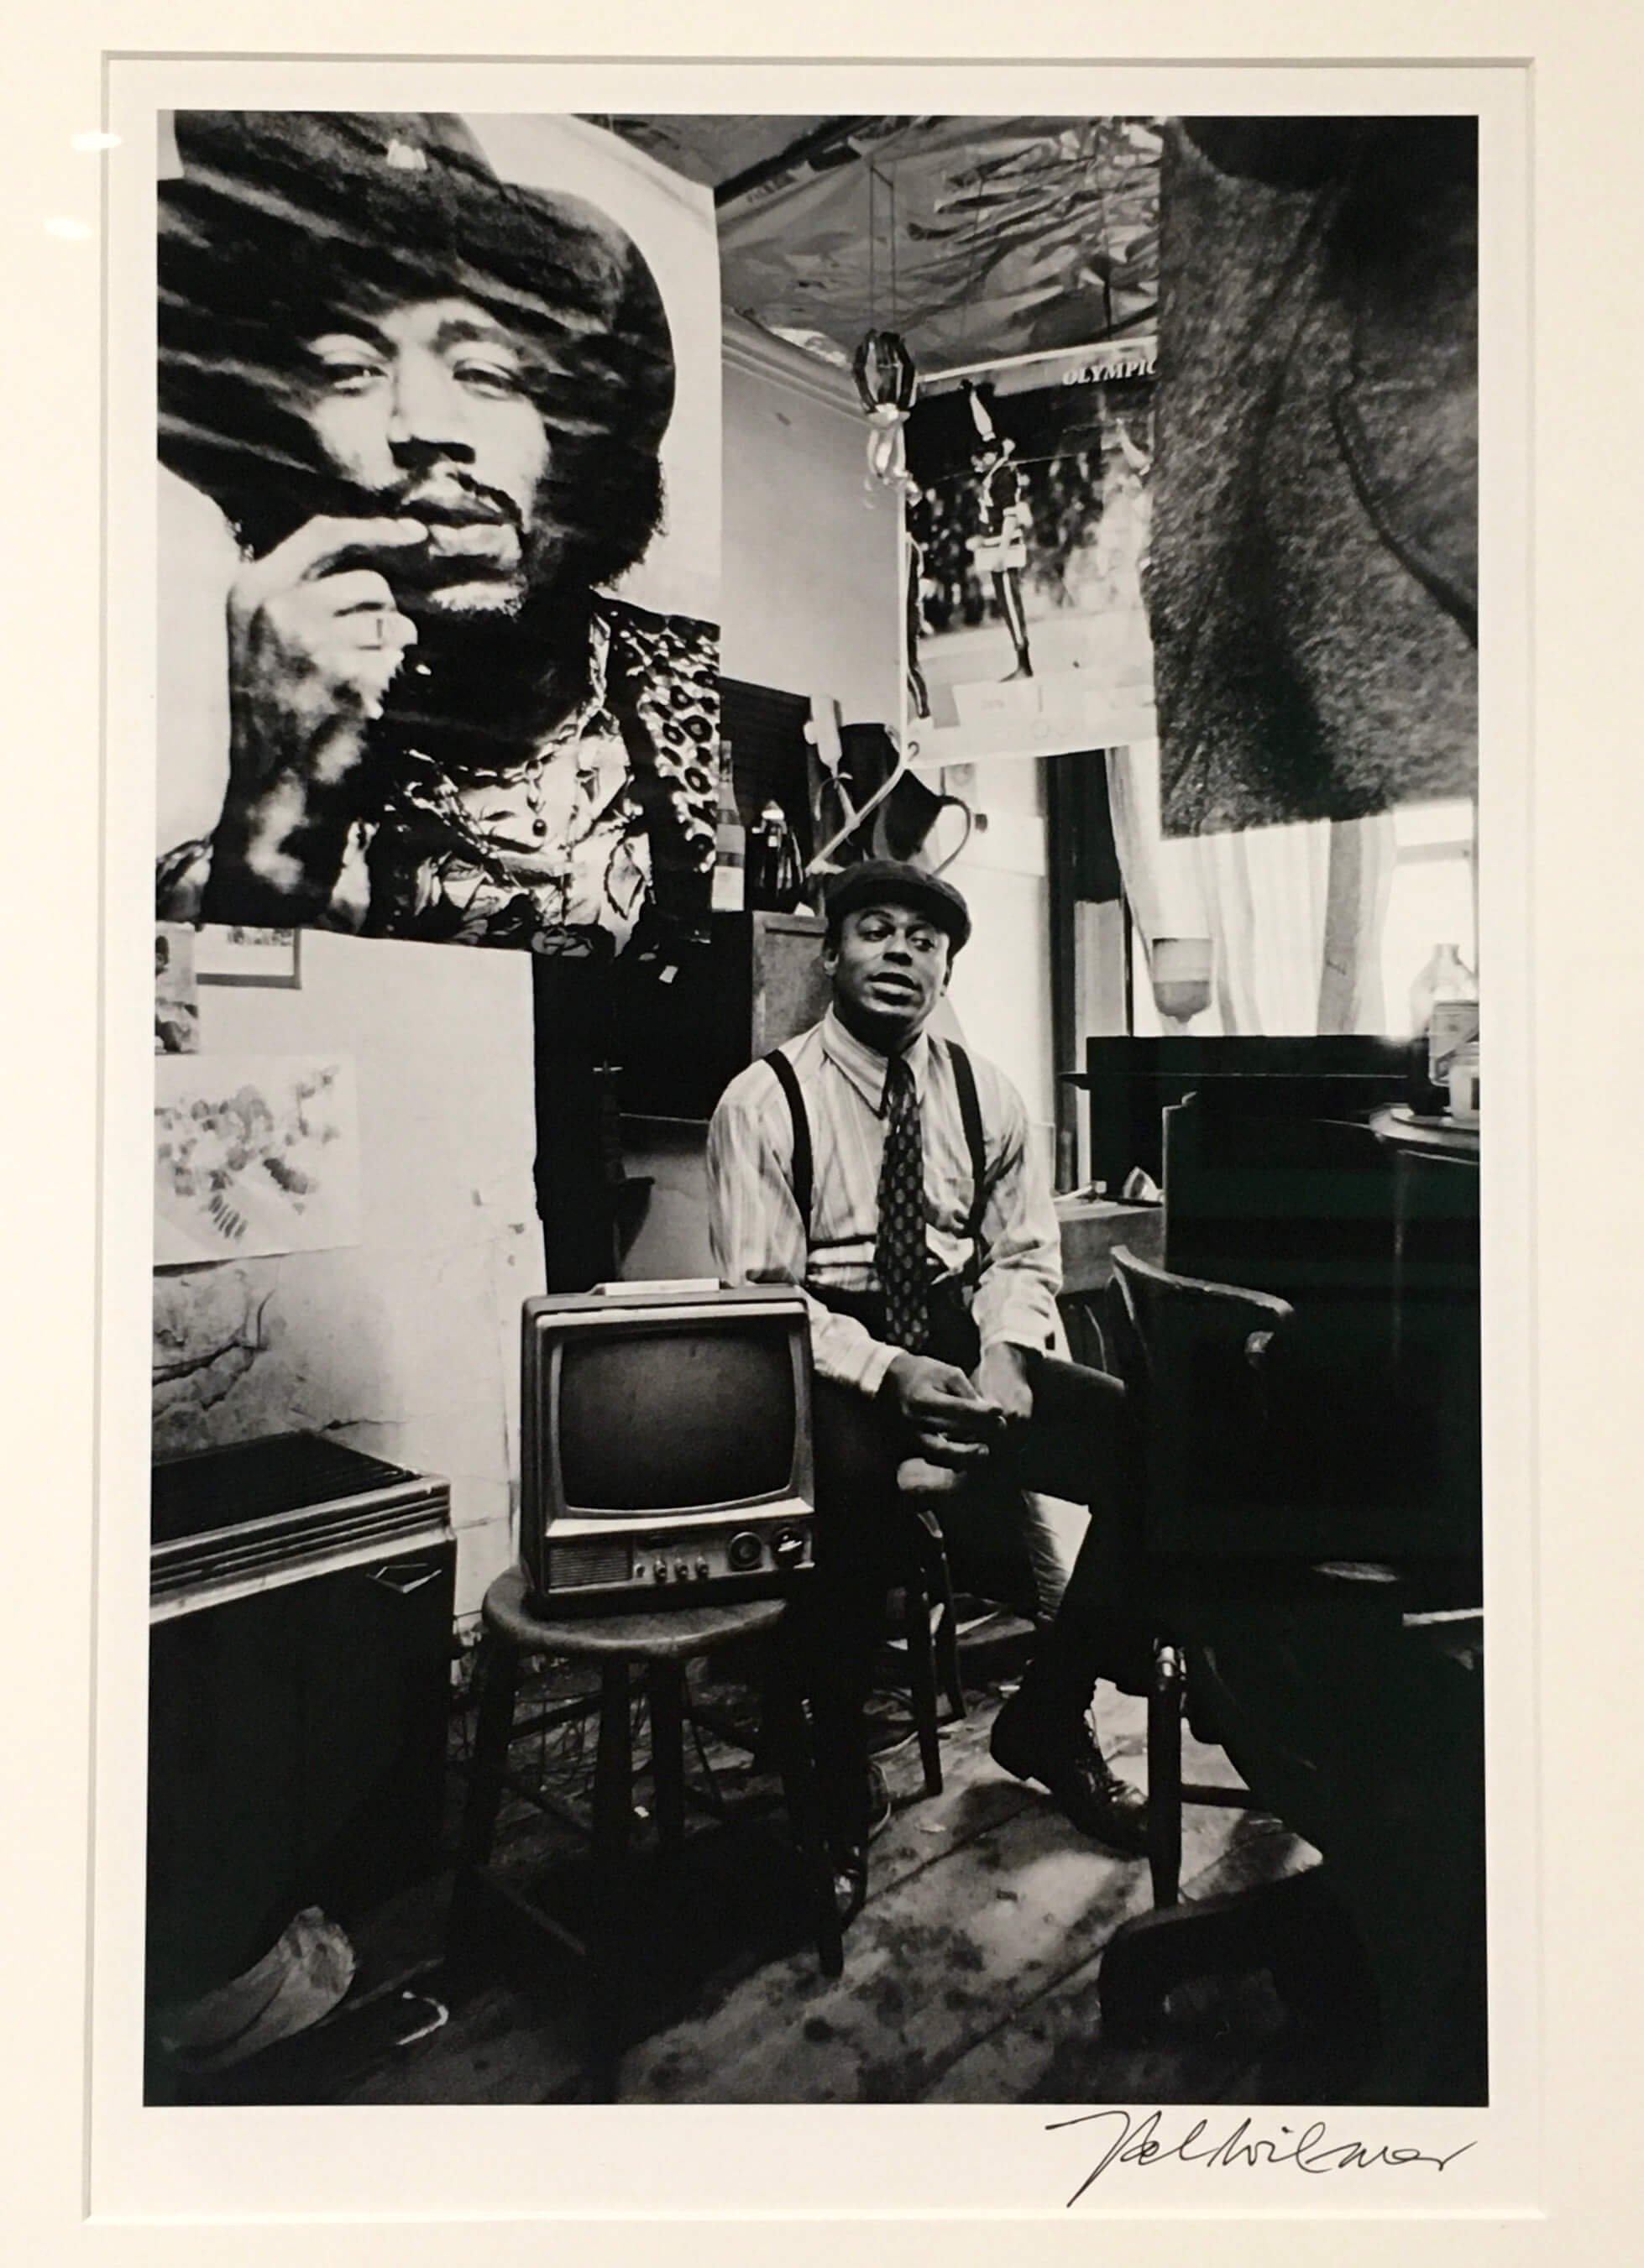 Archie Shepp at 27 Cooper Square, New York, 1971